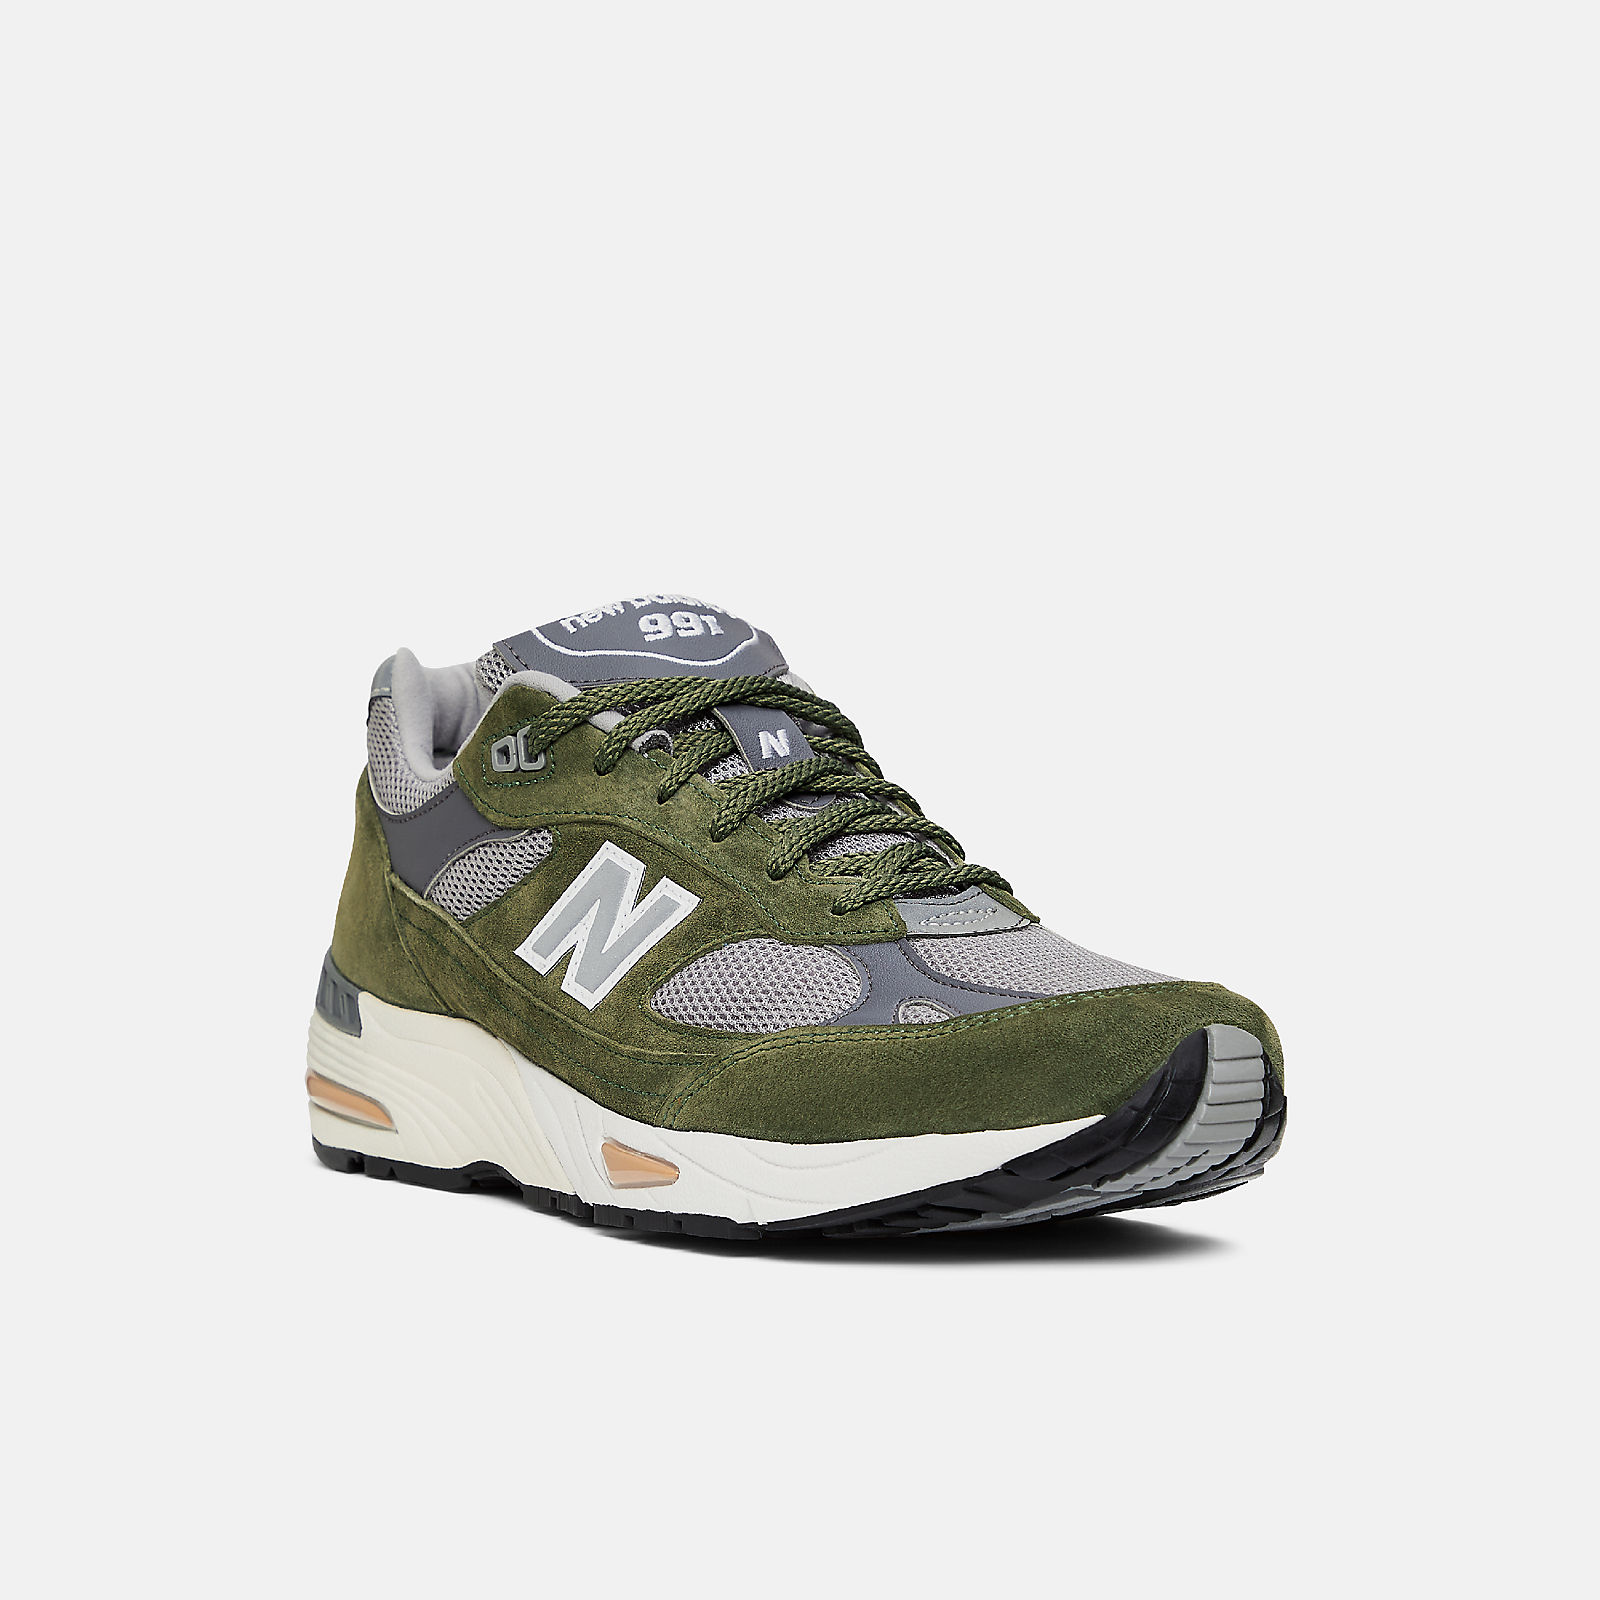 Save 11% 40th Anniversary in Green,Grey Green Mens Trainers New Balance Trainers New Balance Suede Made In Uk 991 Sneakers for Men 